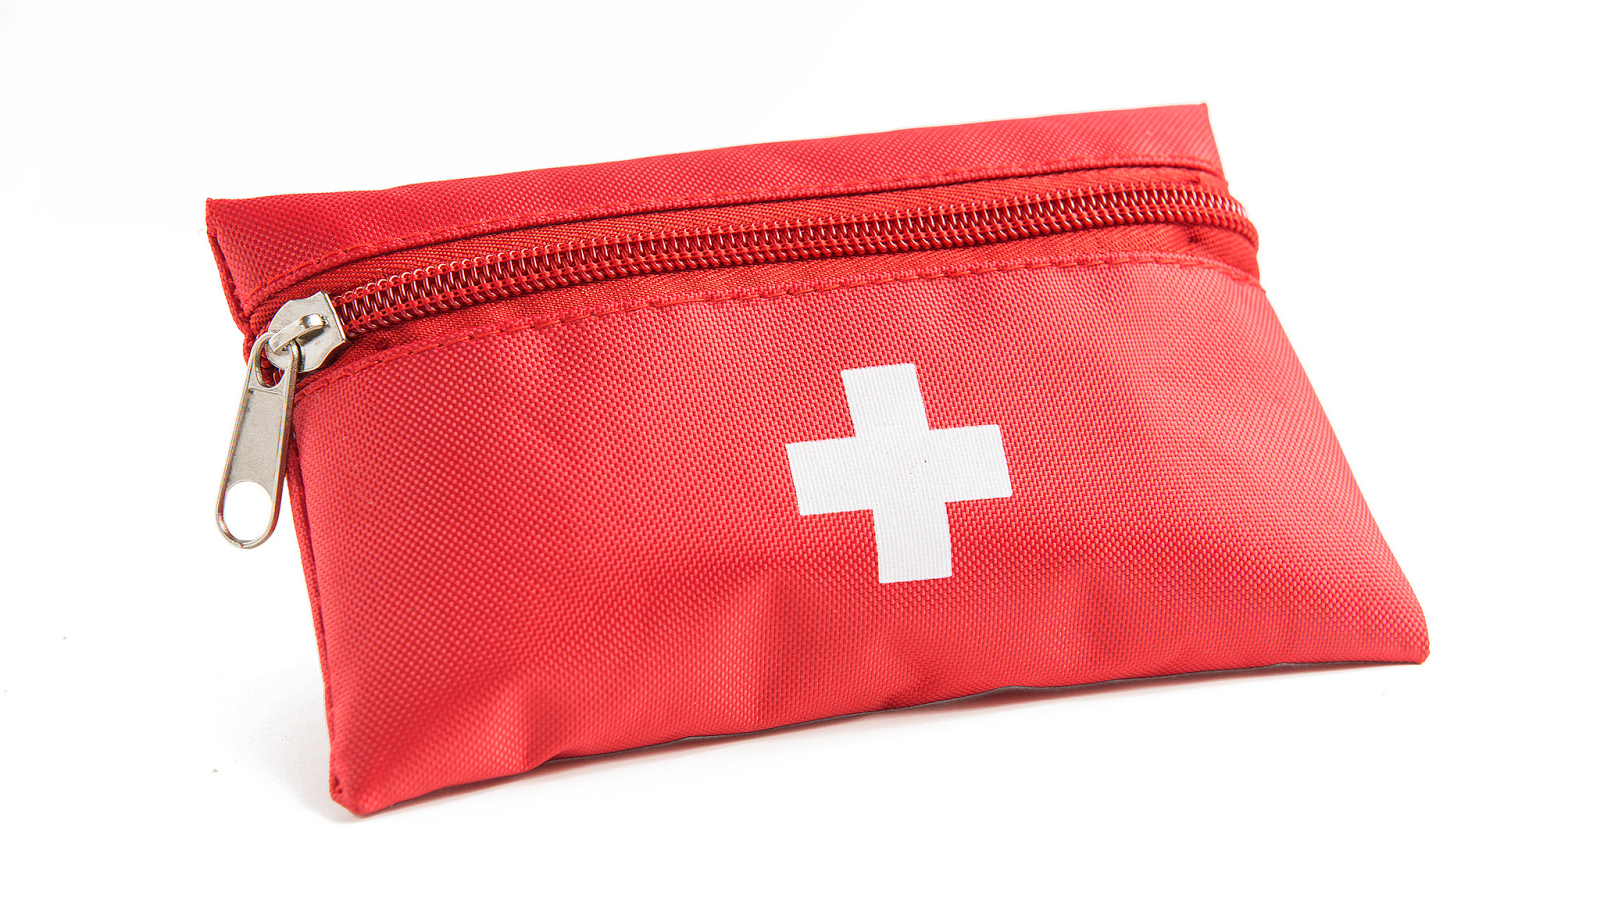 What Useful Items Fit In A Pocket First Aid Kit?